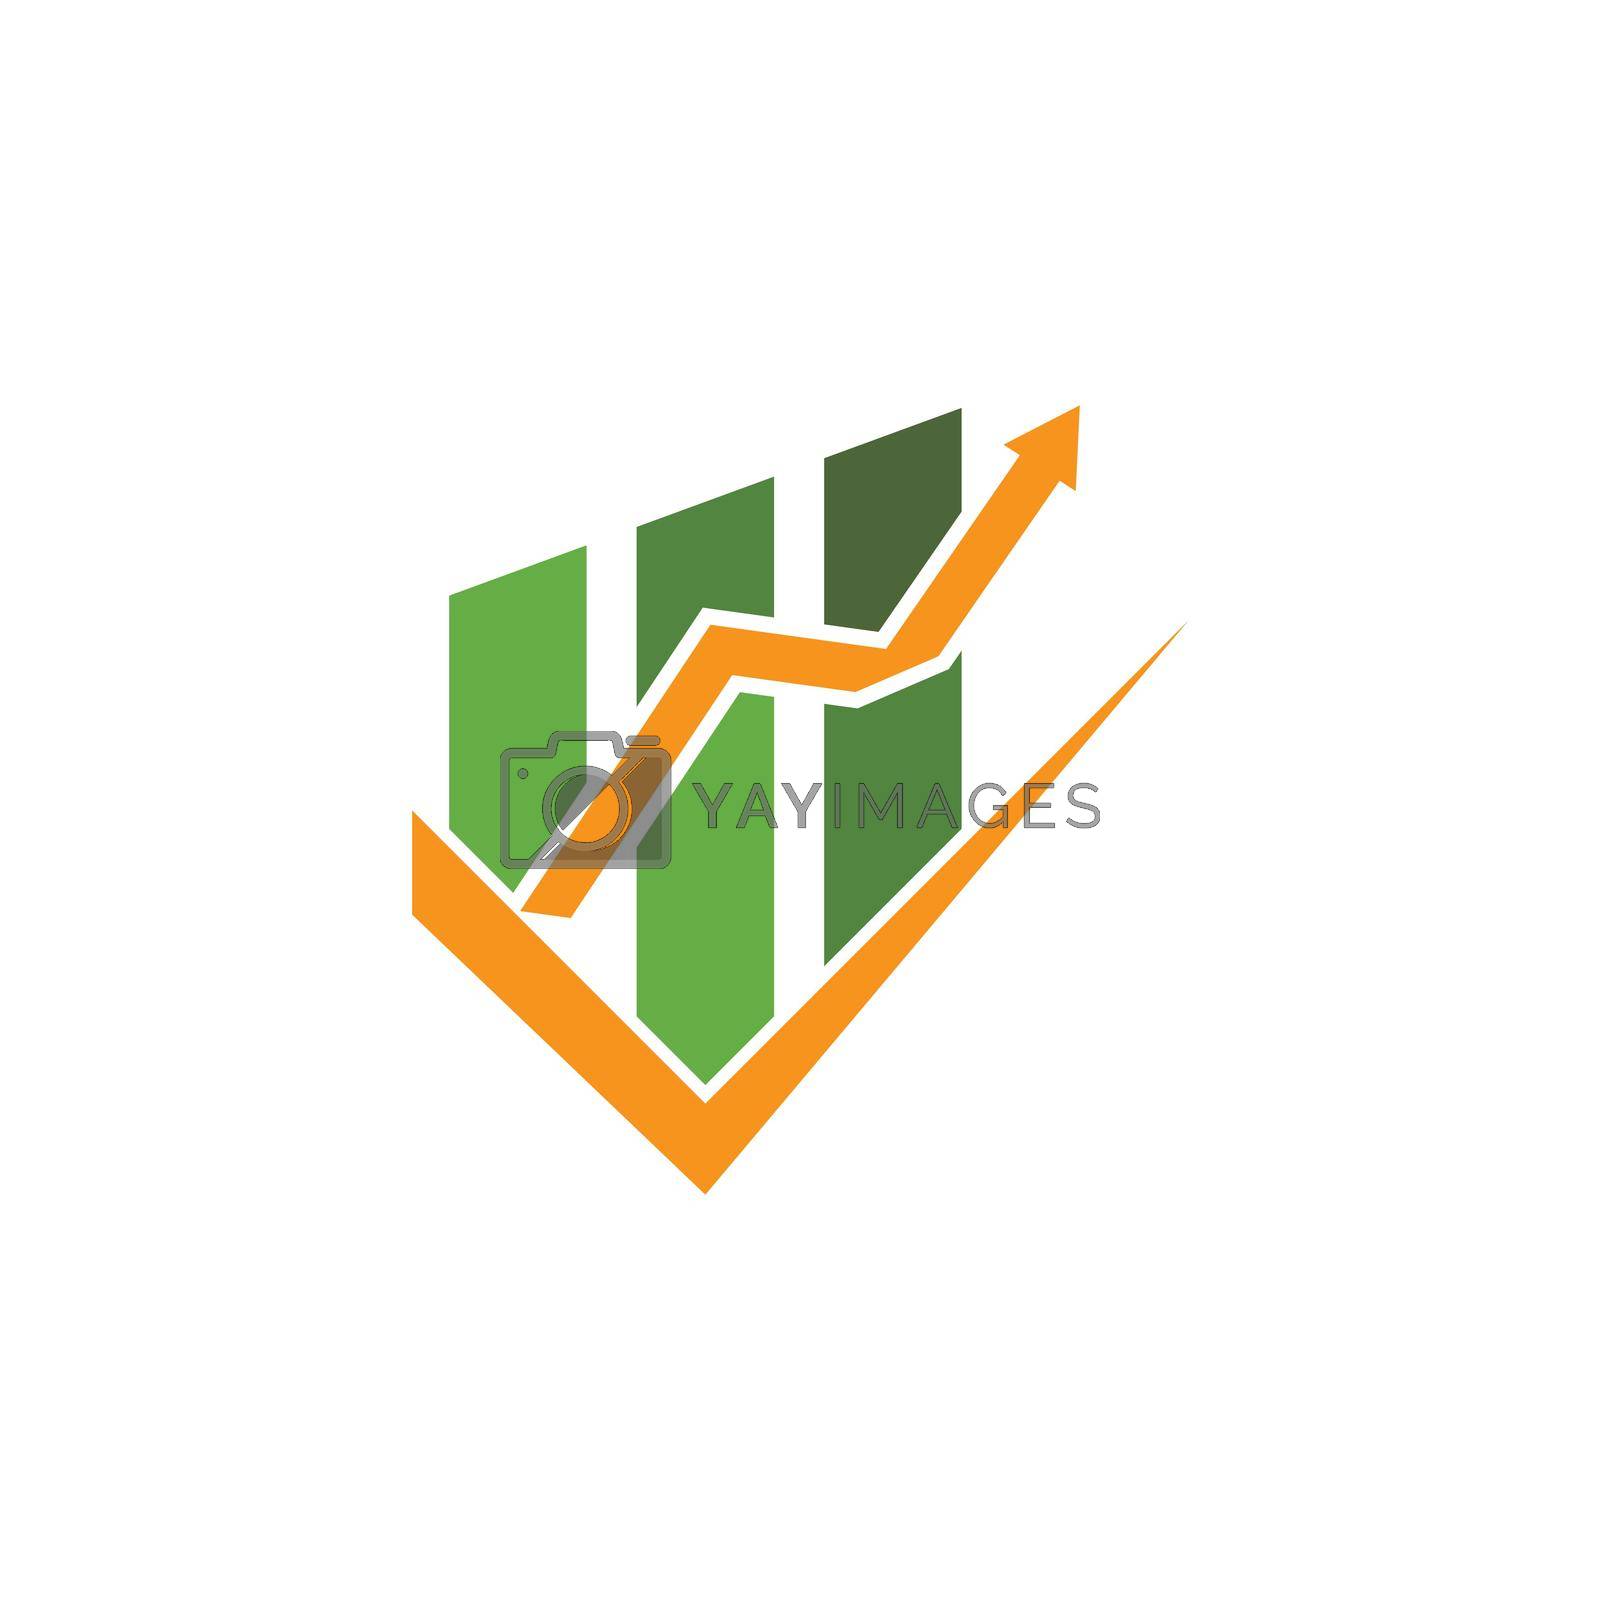 Royalty free image of Business Finance professional logo  by awk